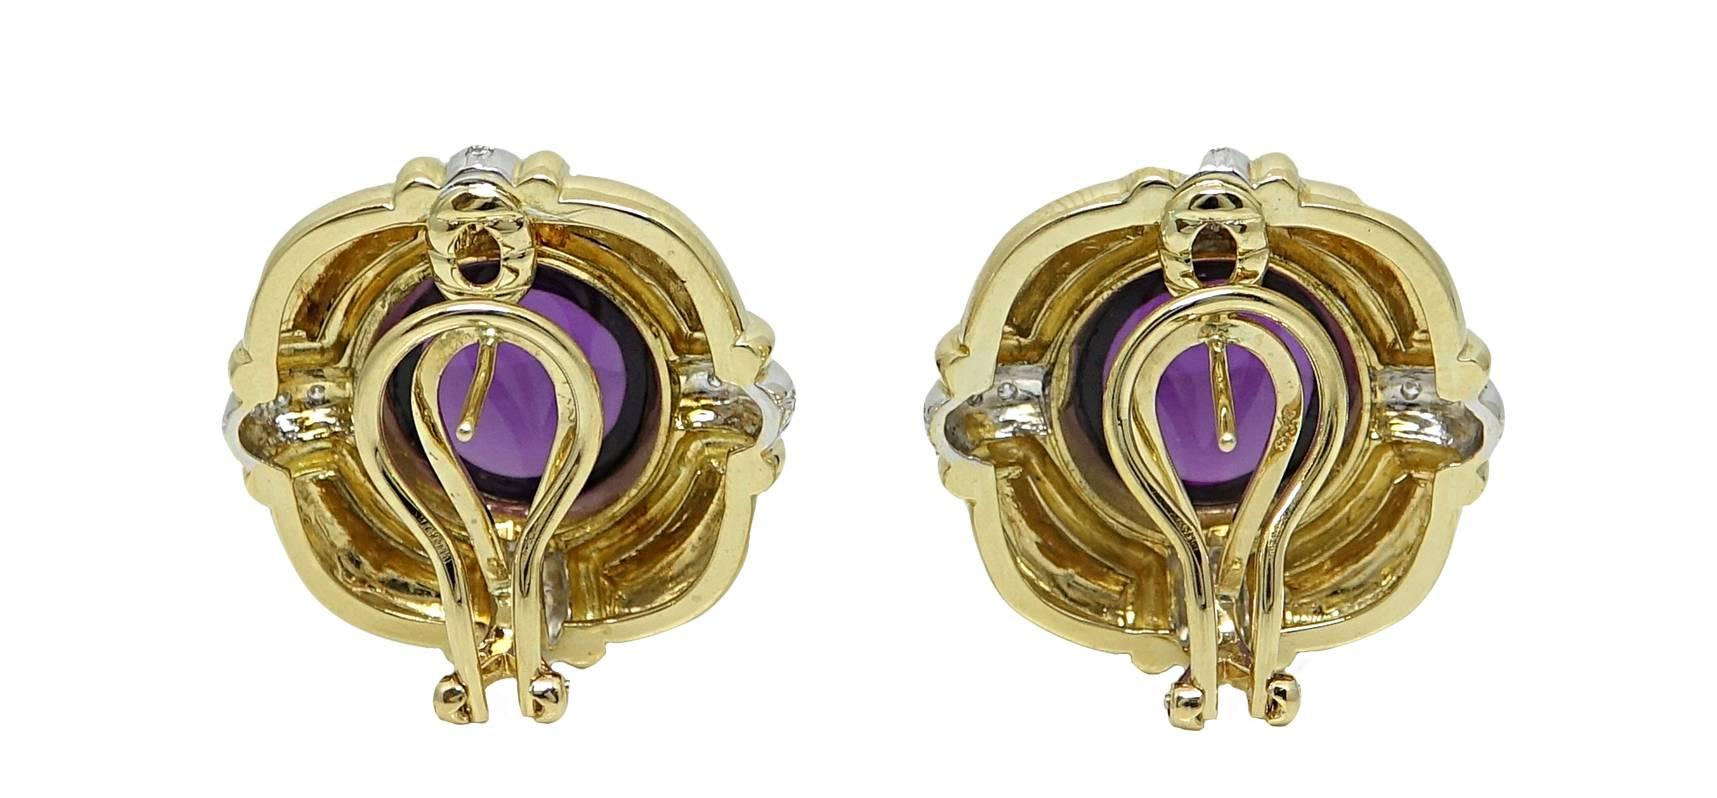 18K Yellow Gold Earrings With Center CaboChon Amethyst Weighing A Total Carat Weight Of 26.00. Each Side Of These Earrings Have A Small Detailing Of Diamond Surrounded By White Gold. These Earrings Have A Lever Back Closure. 